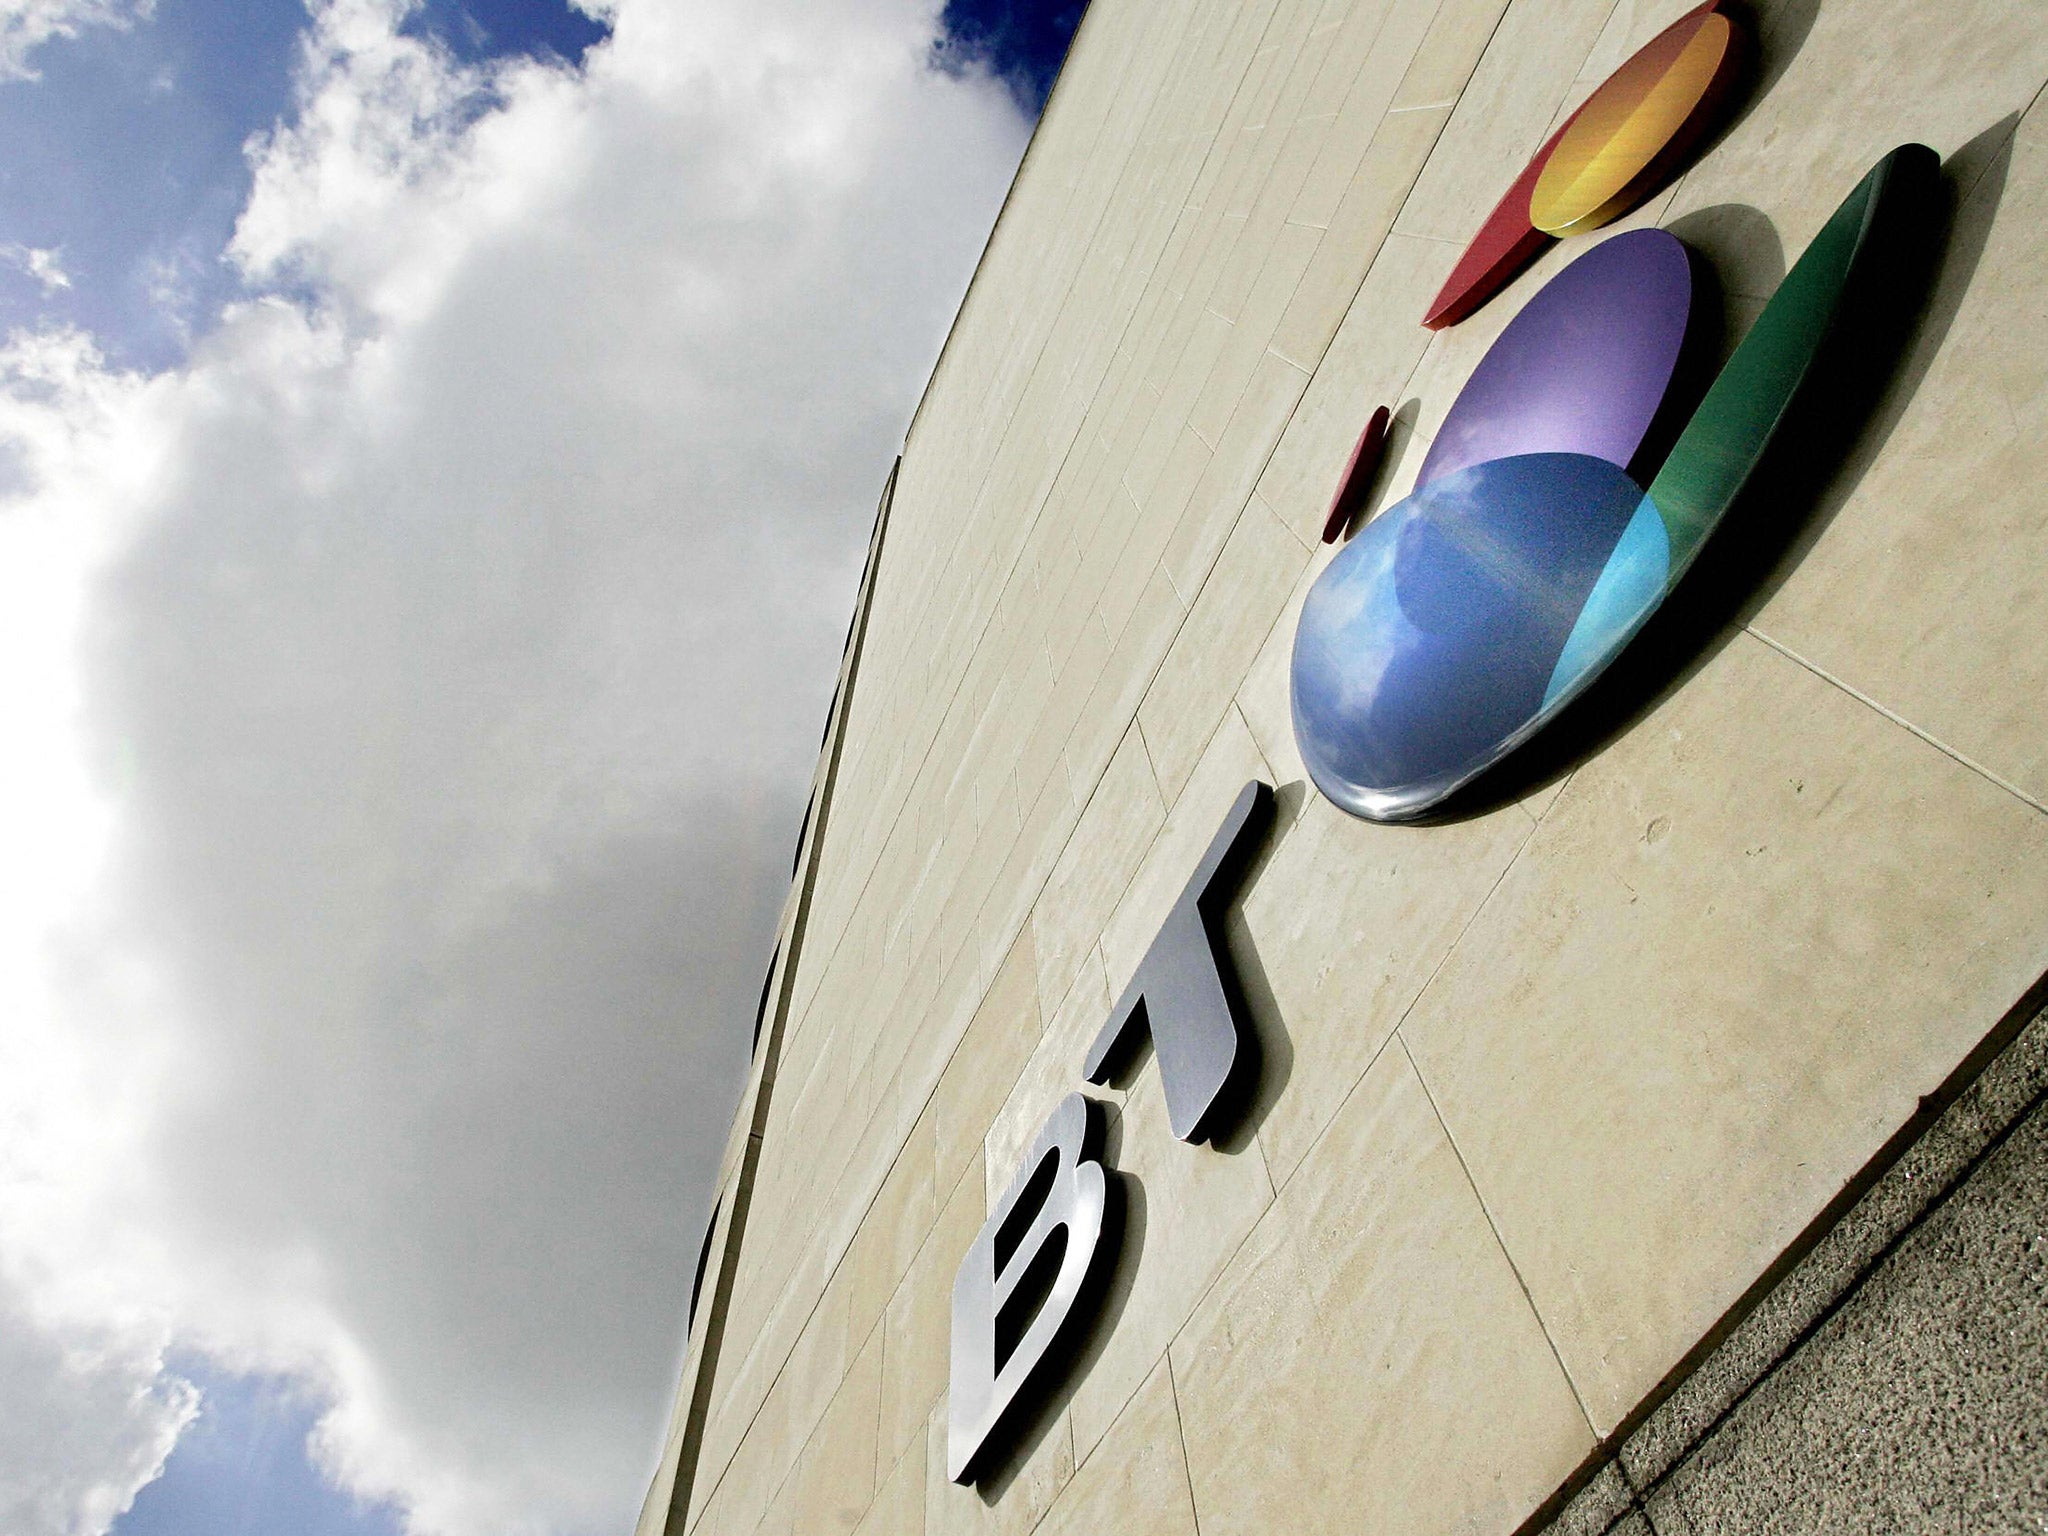 Free or not? BT's caller display deal is still confusing consumers